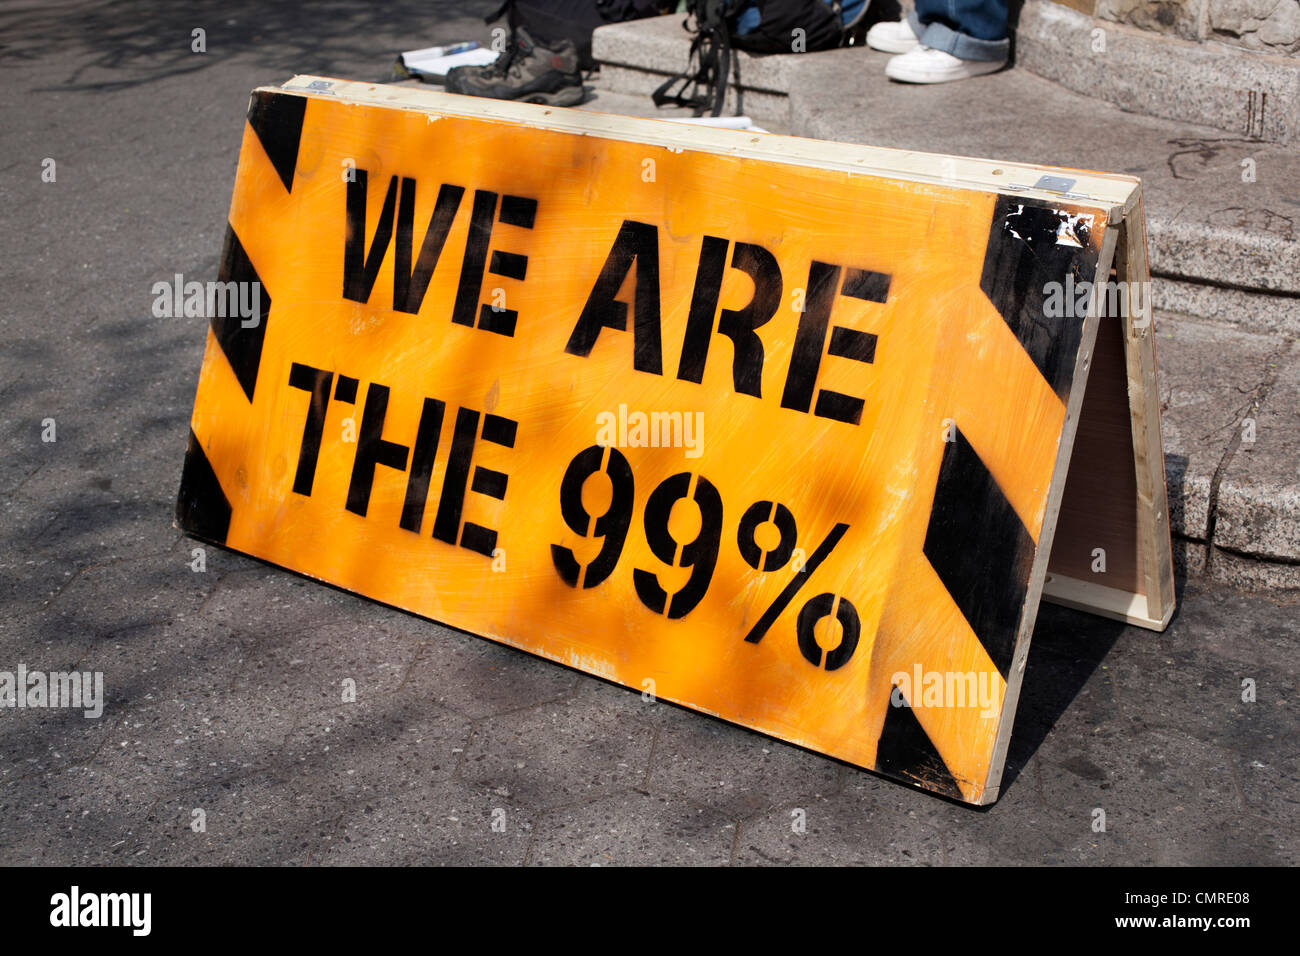 Signs at the Occupy encampment, Union Square, New York City. March 2012 Stock Photo